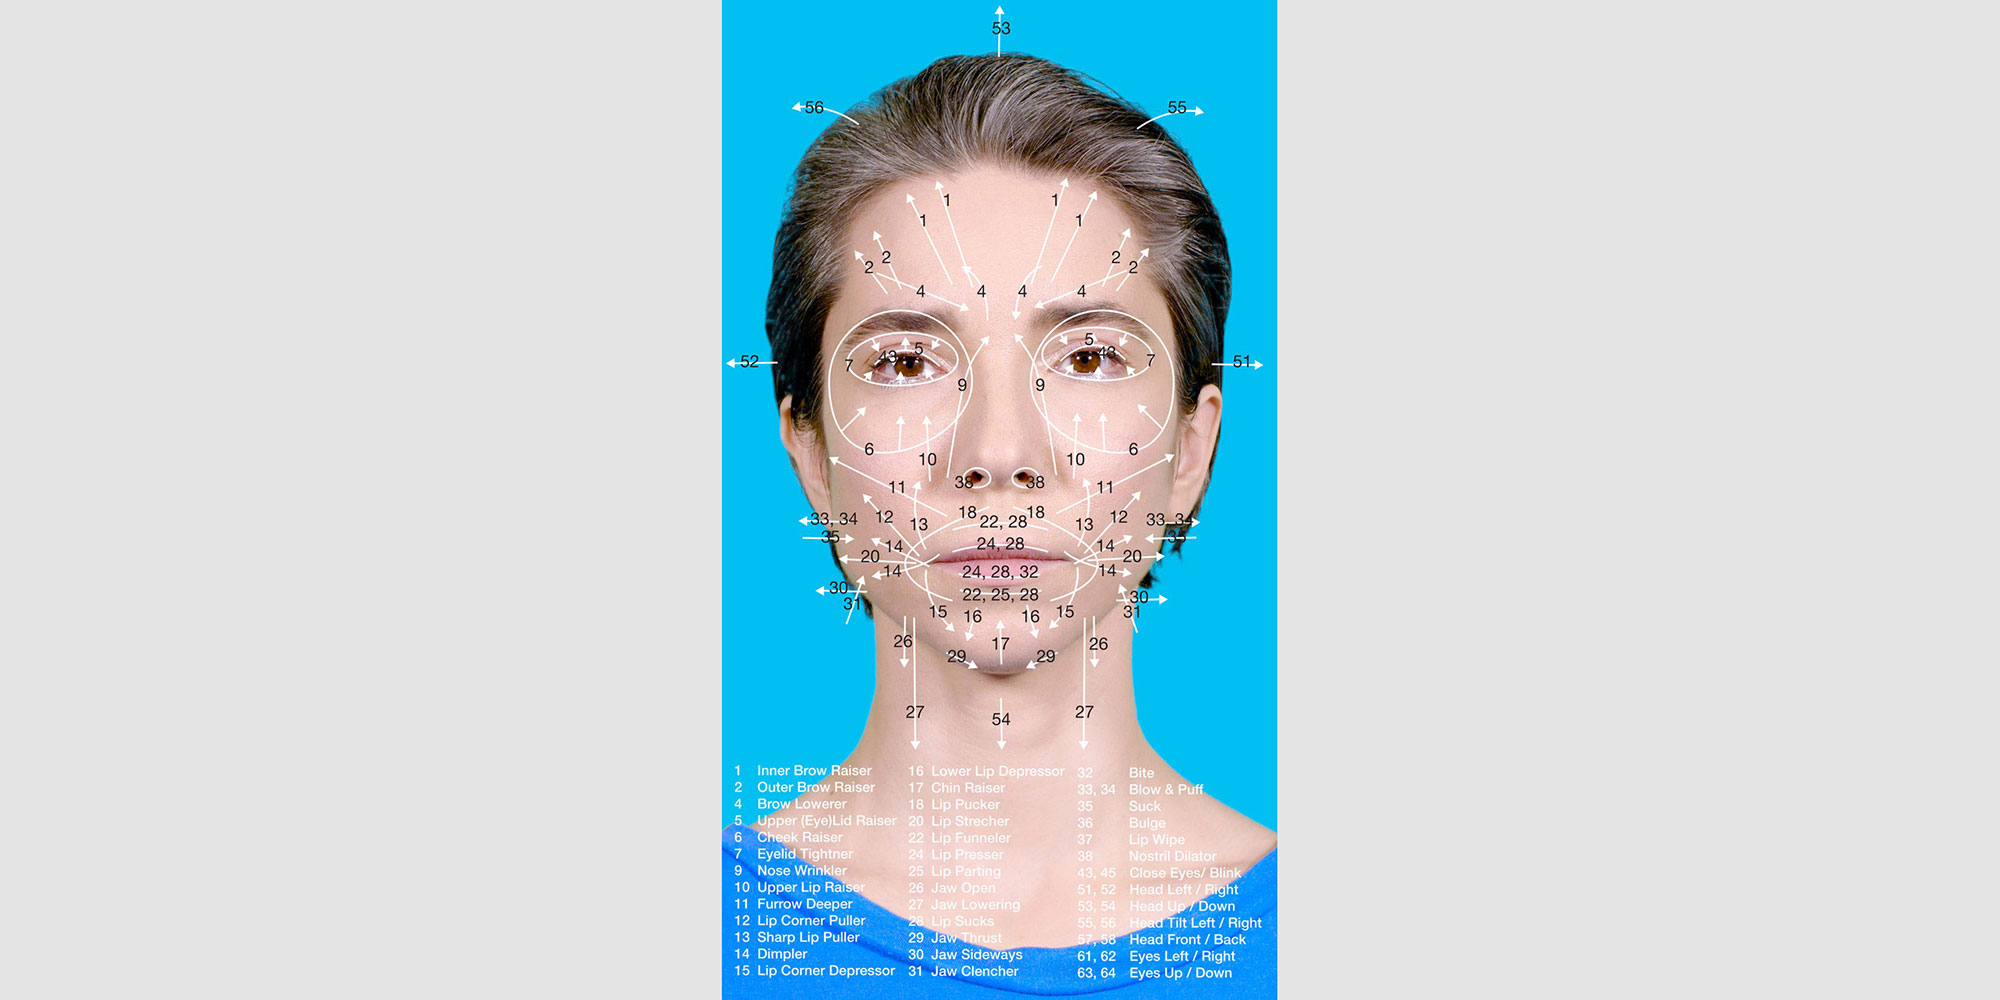 A research on emotion recognition software, 2018